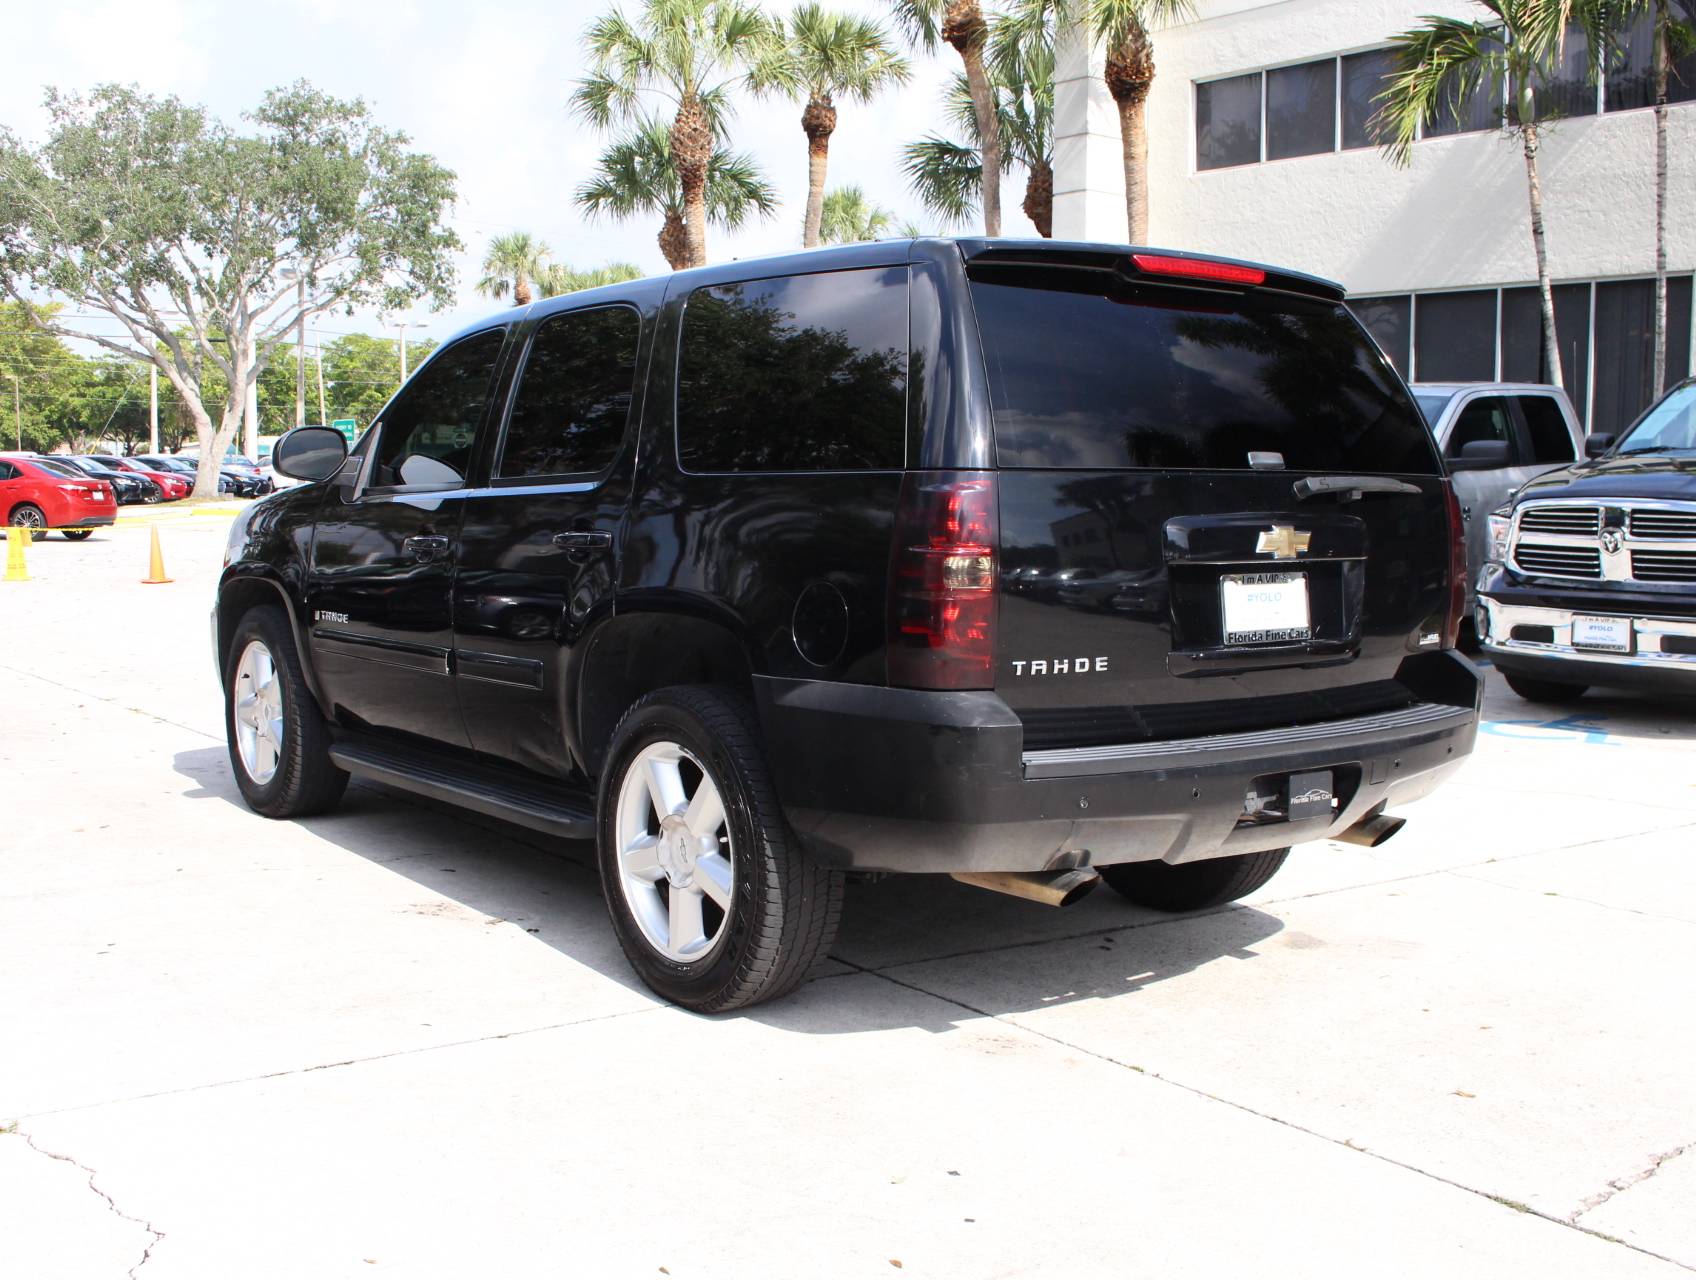 Florida Fine Cars - Used CHEVROLET TAHOE 2008 WEST PALM Lt